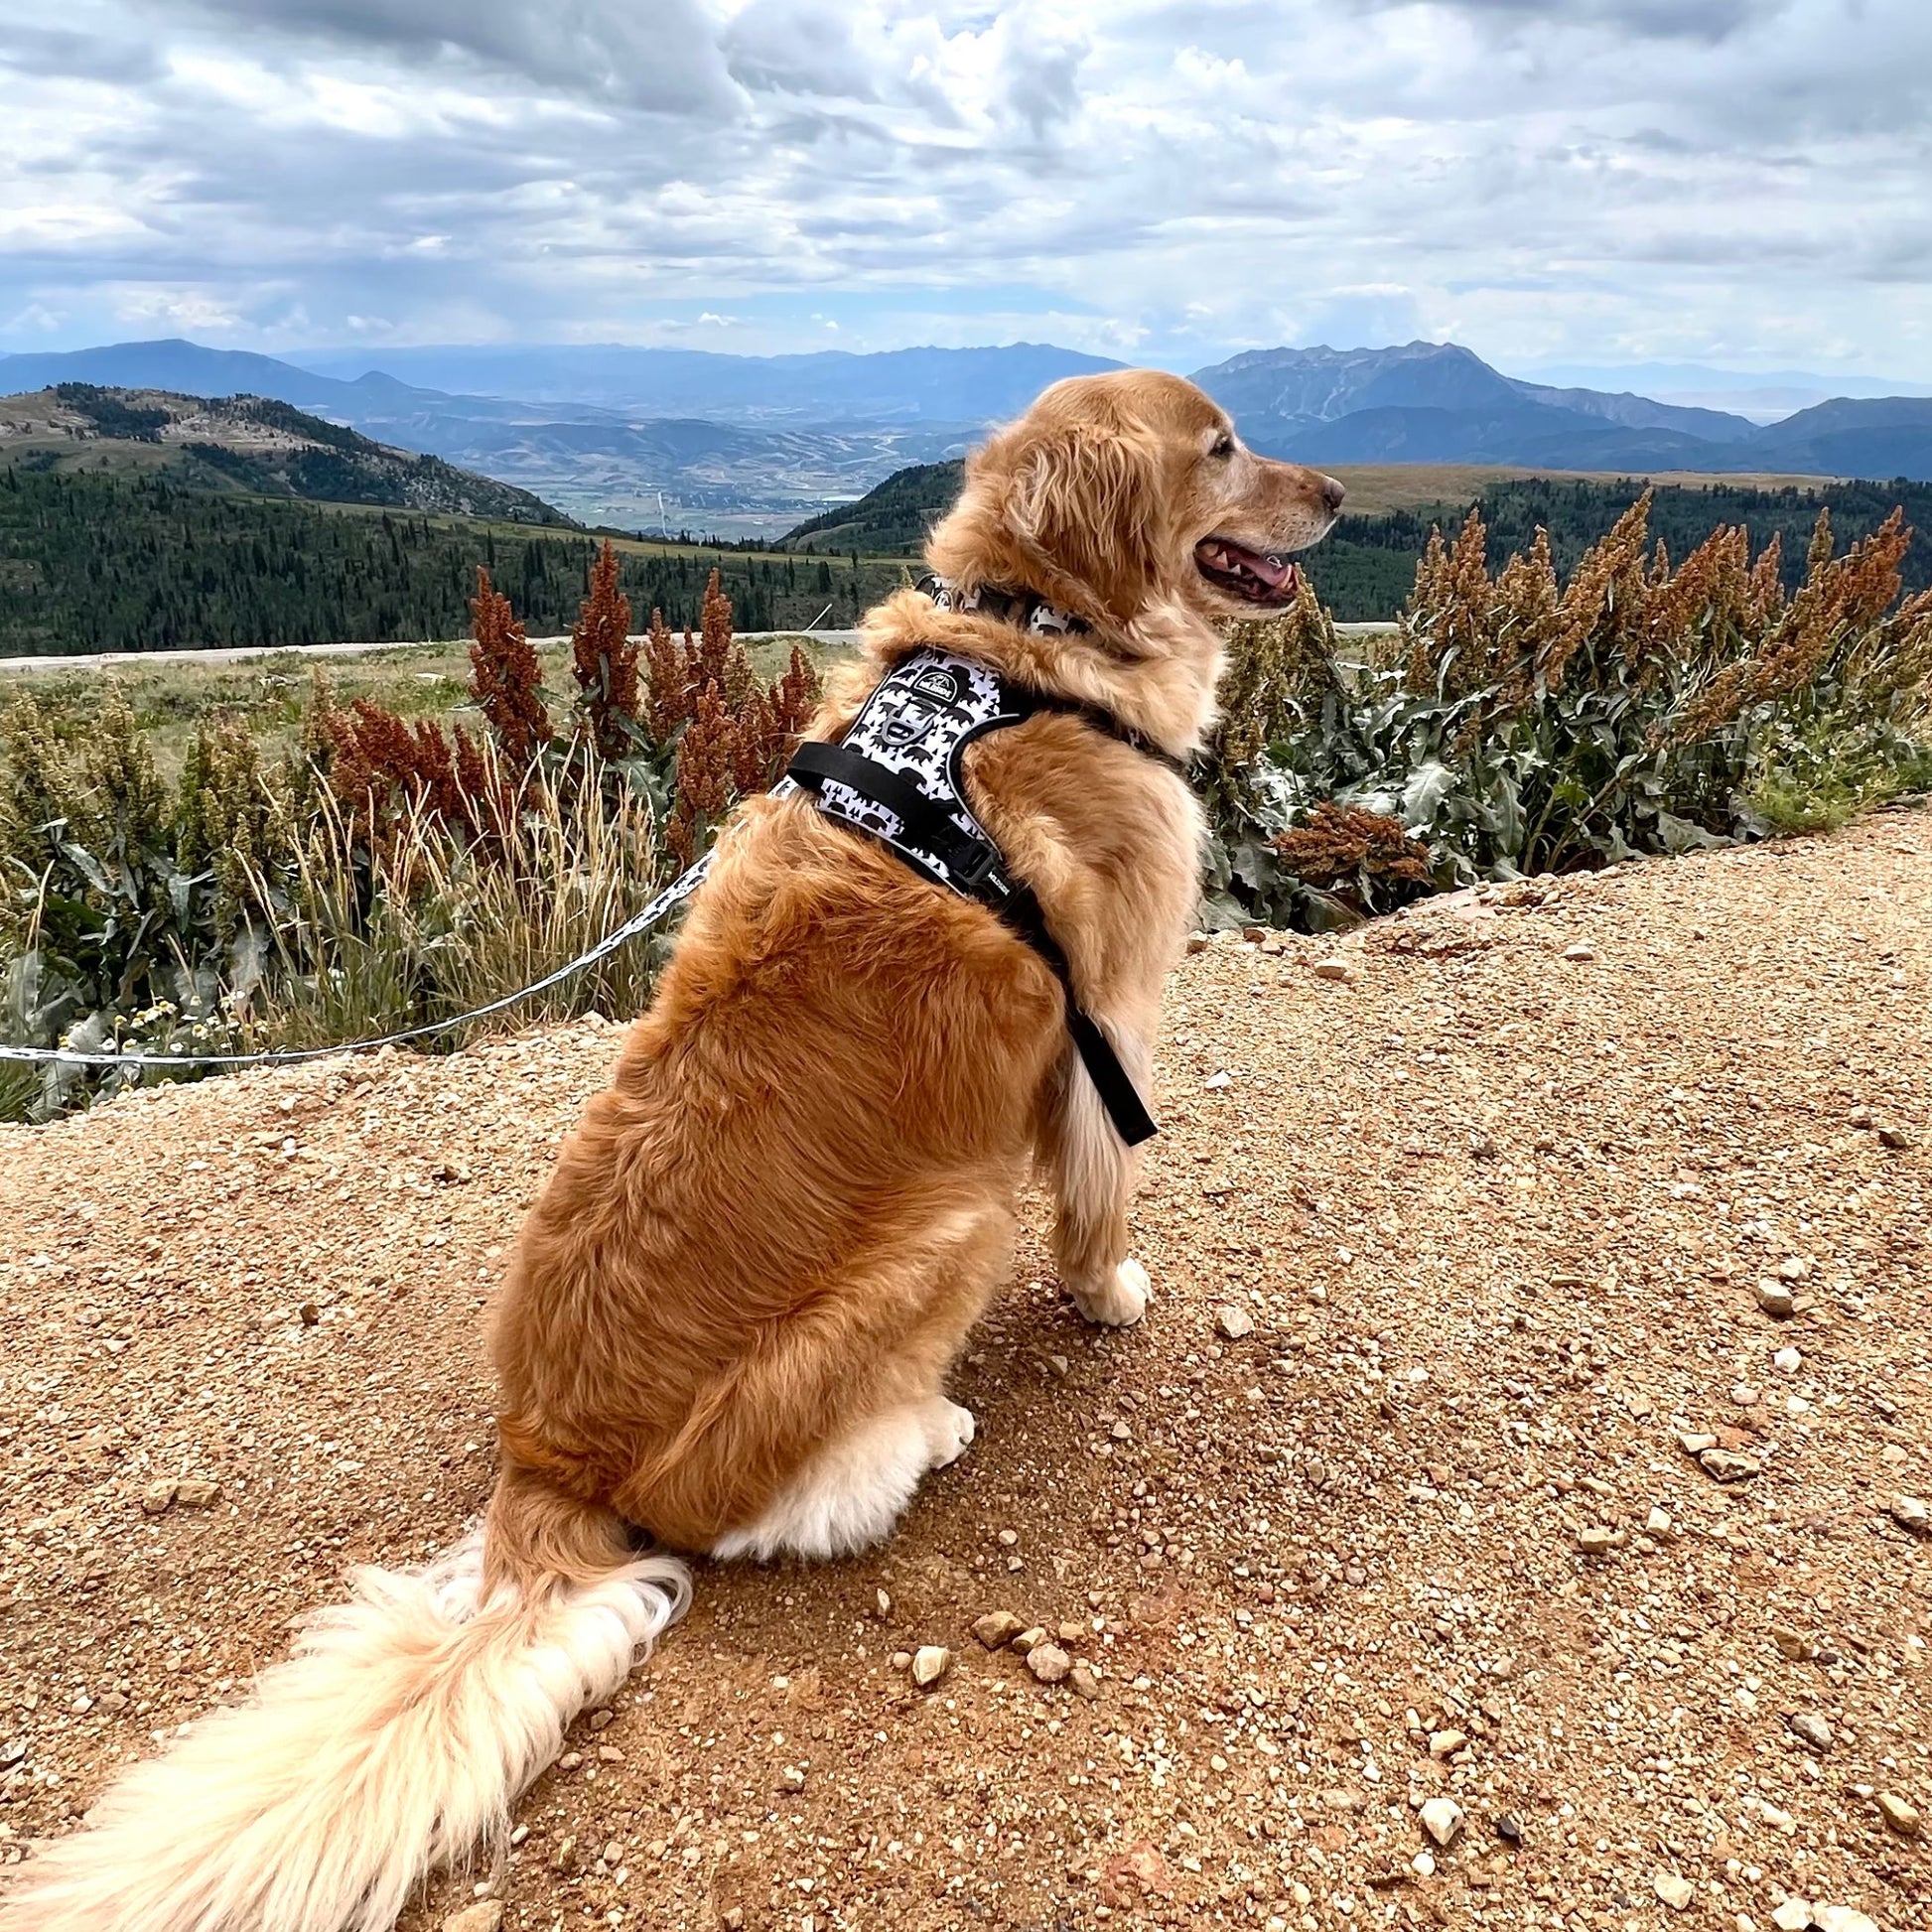 gold dog sitting looking at mountains located at powder mountain utah in black and gray dog harness with handle, dog harness for golden retriever, dog harness for golden retriever puppy, step in dog hanress, no pull dog harness for golden retriever, dog harness usa dog harness for german shepherd dog harness hiking dog harness best dog walking company harness dog harness for large dogs dog harness for large dog dog harness to stop pulling front harness vs back harness